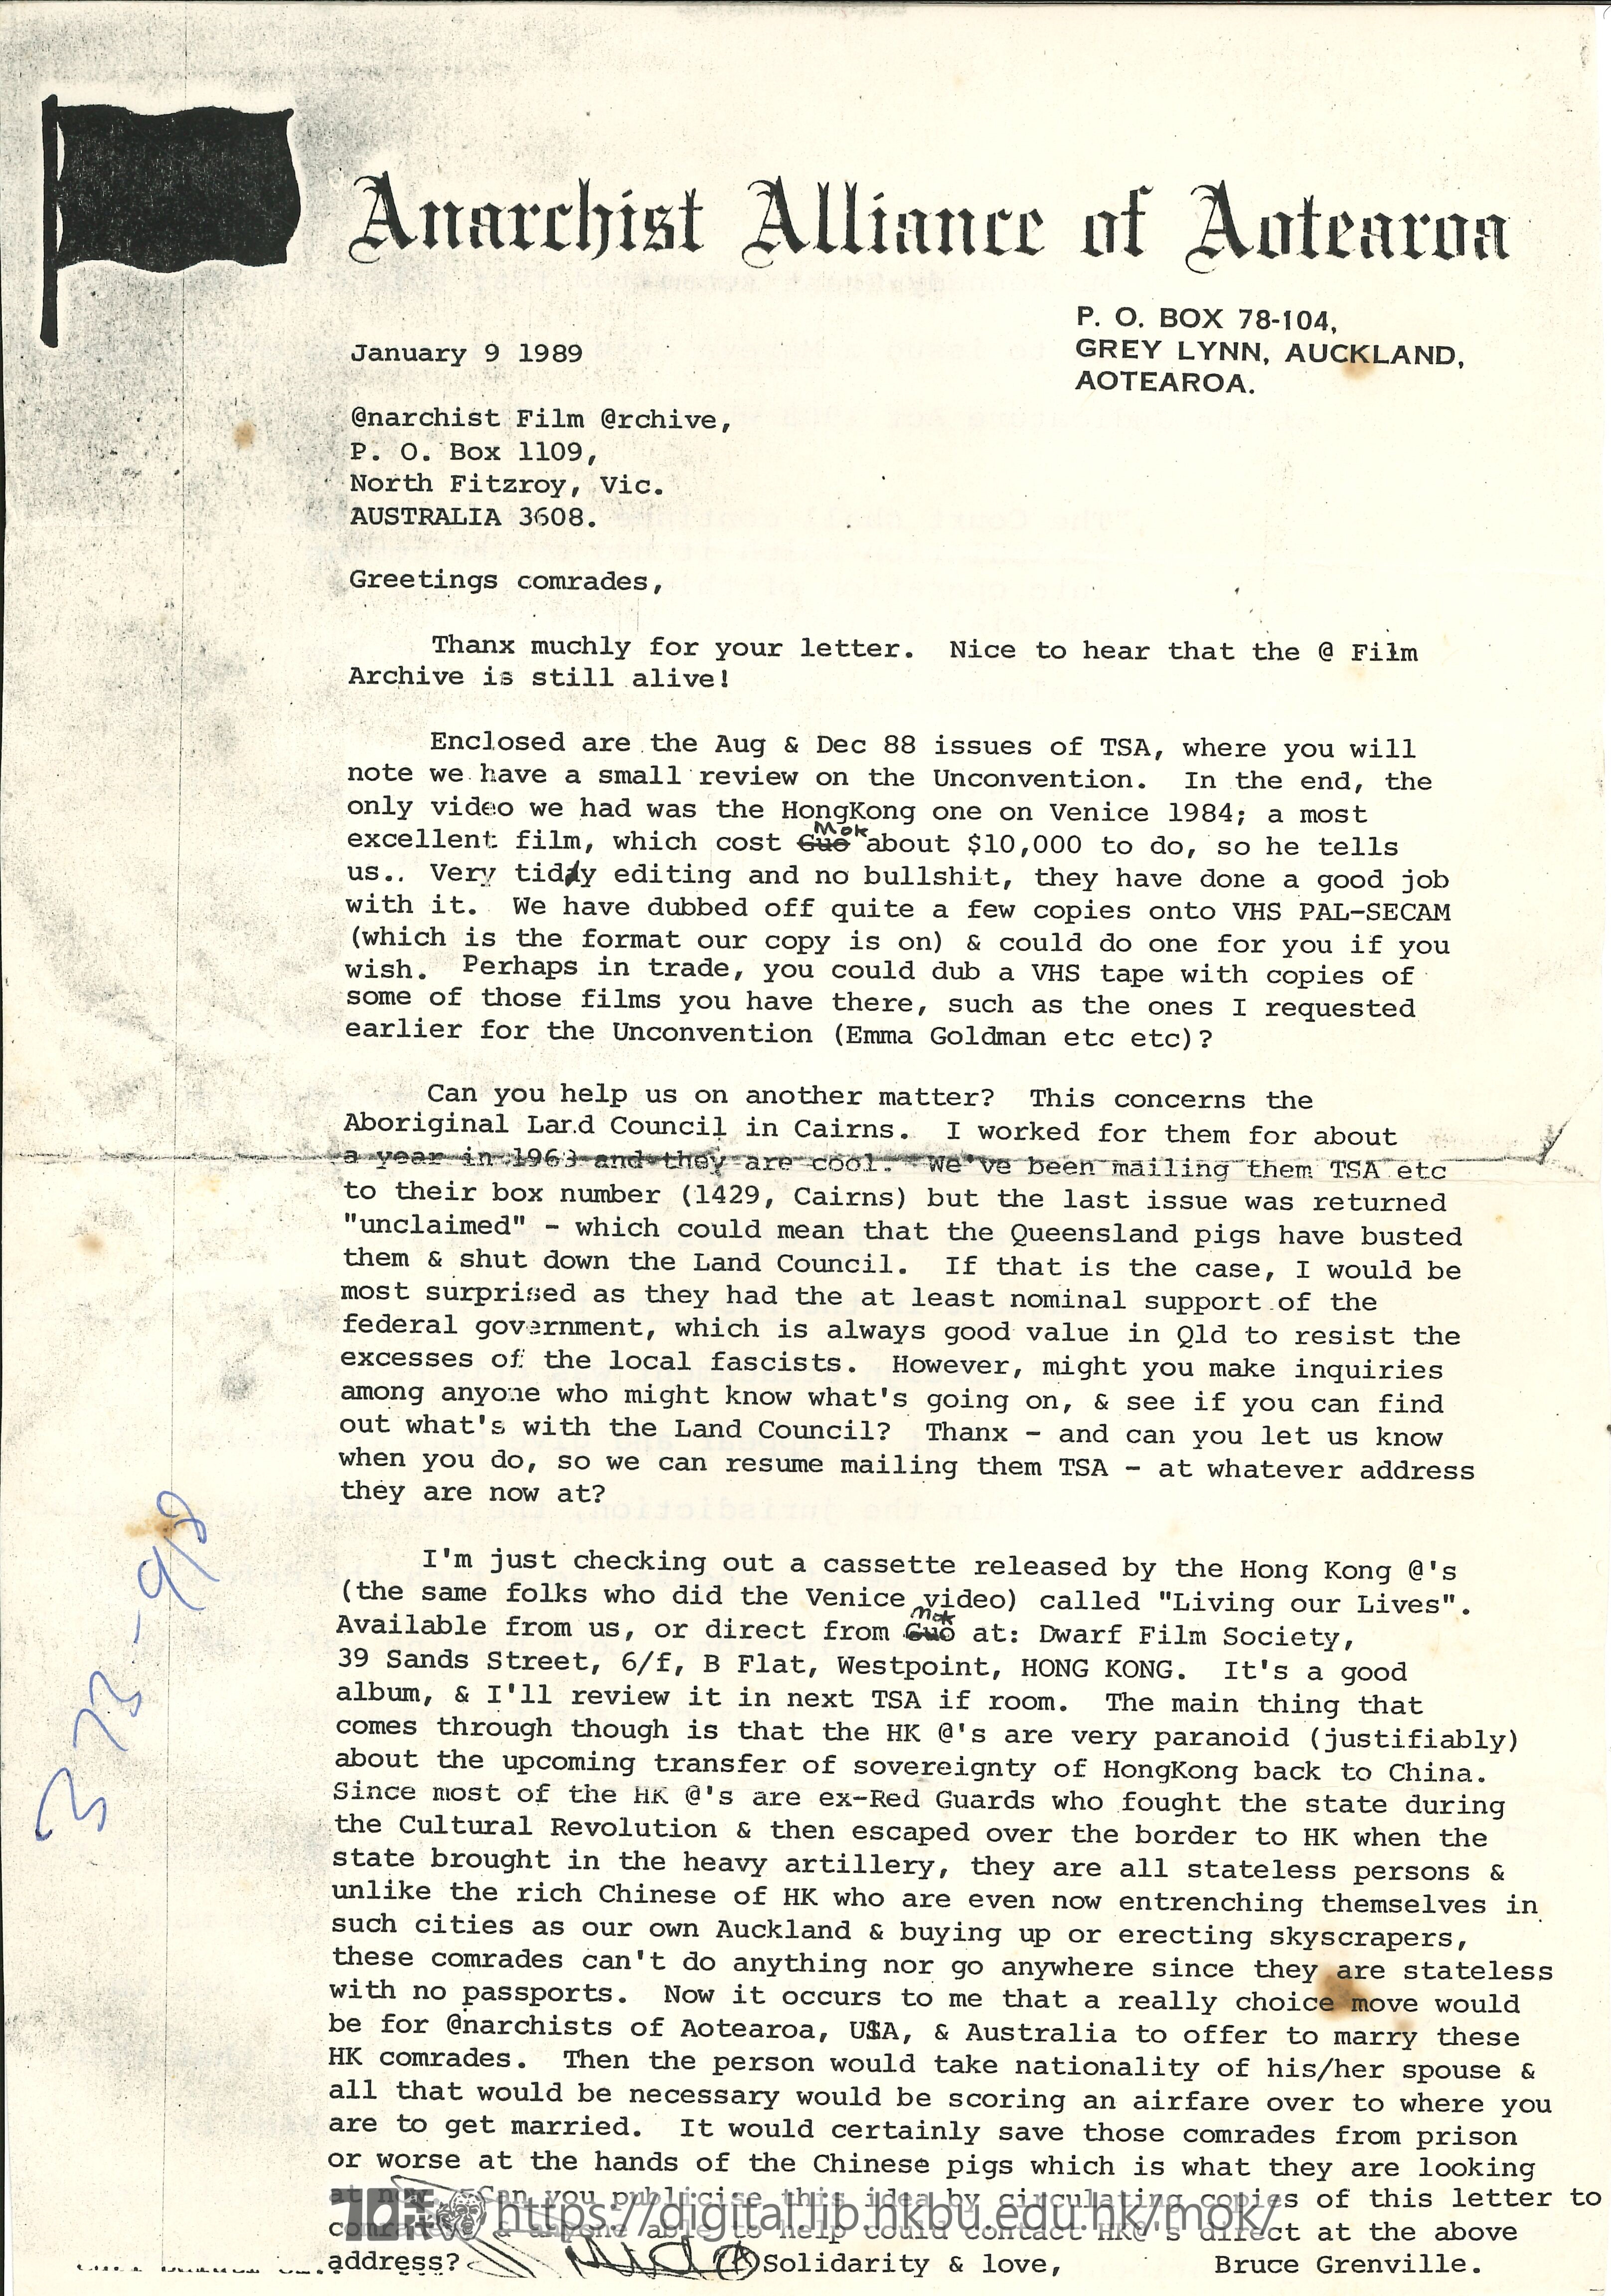   Letter from Bruce Grenville to Mok Chiu Yu GRENVILLE, Bruce 